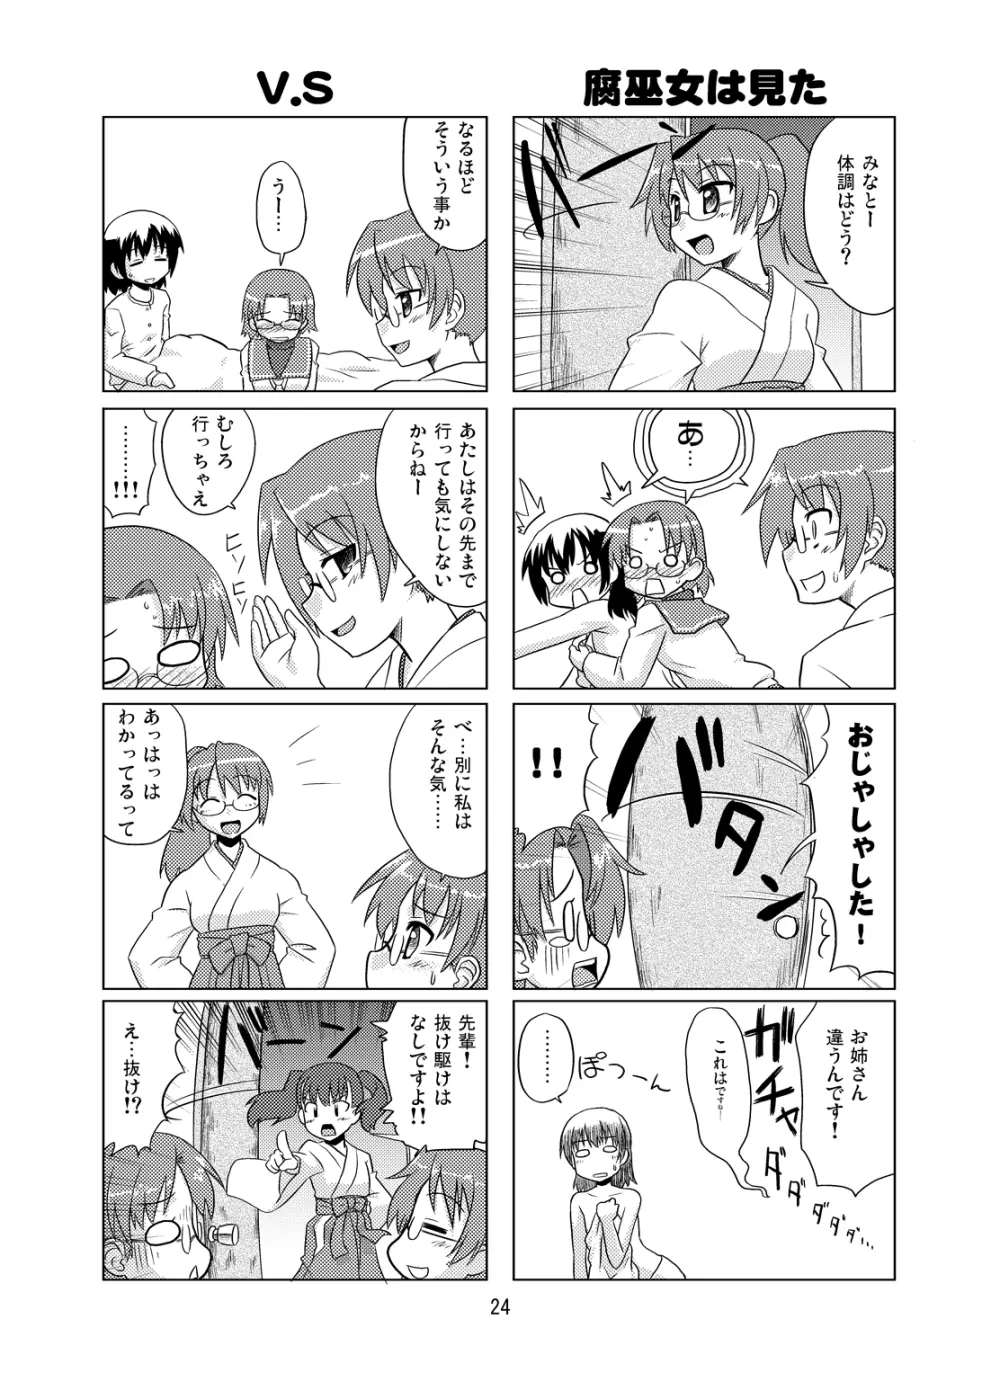 Composition Mix 8 はじマル！6 Page.23